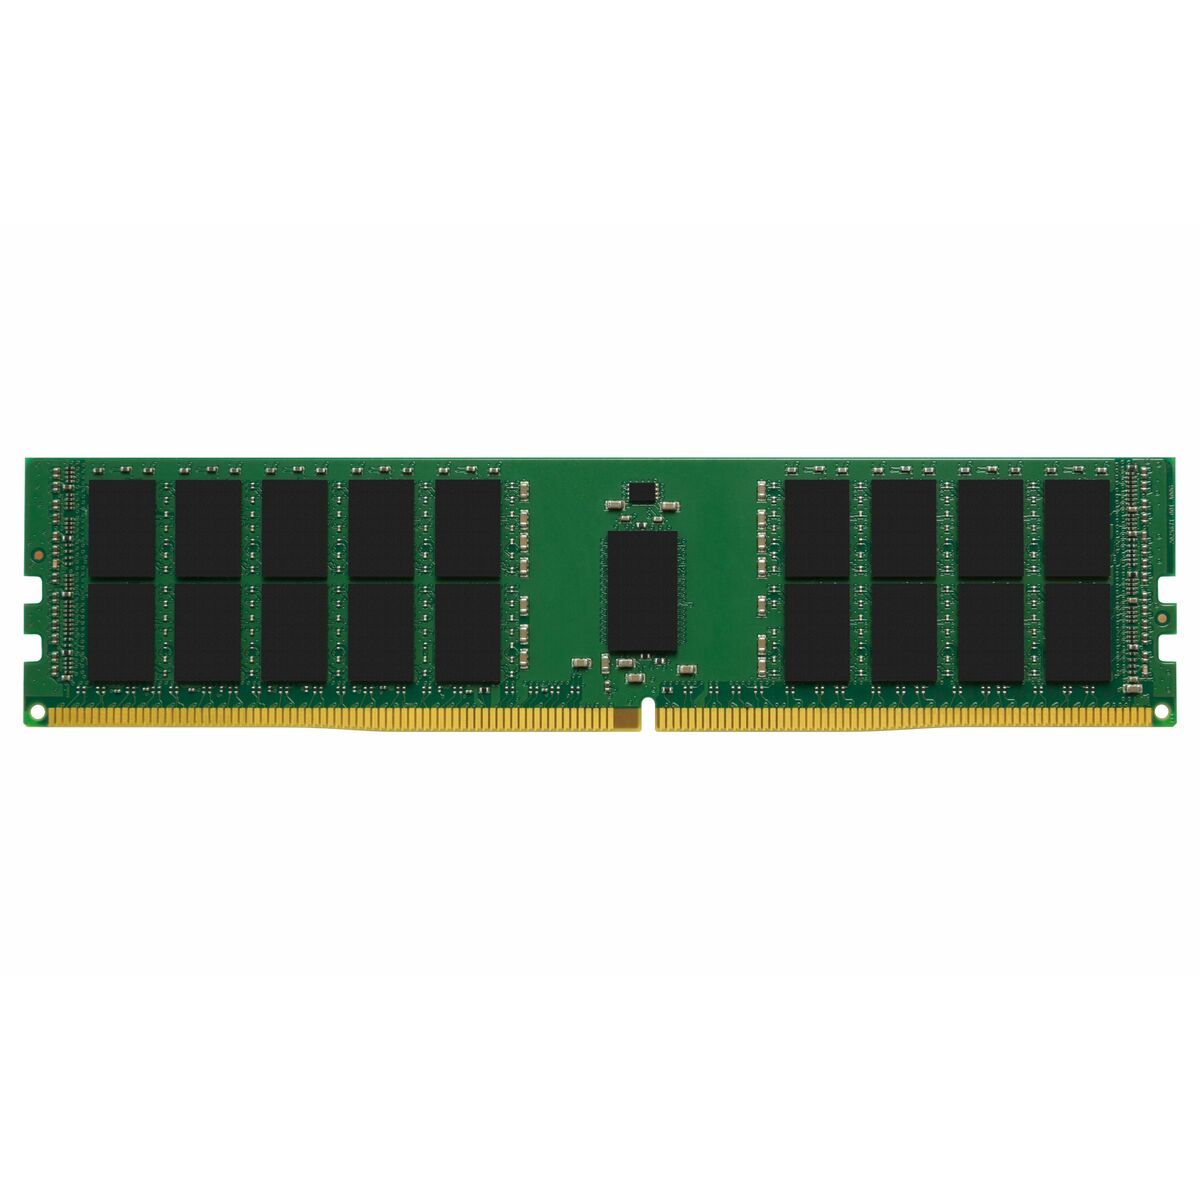 RAM Memory Kingston KSM32RS8/8HDR DDR4 8 GB CL22, Kingston, Computing, Components, ram-memory-kingston-ksm32rs8-8hdr-ddr4-8-gb-cl22, Brand_Kingston, category-reference-2609, category-reference-2803, category-reference-2807, category-reference-t-19685, category-reference-t-19912, category-reference-t-21360, category-reference-t-25658, computers / components, Condition_NEW, Price_50 - 100, Teleworking, RiotNook